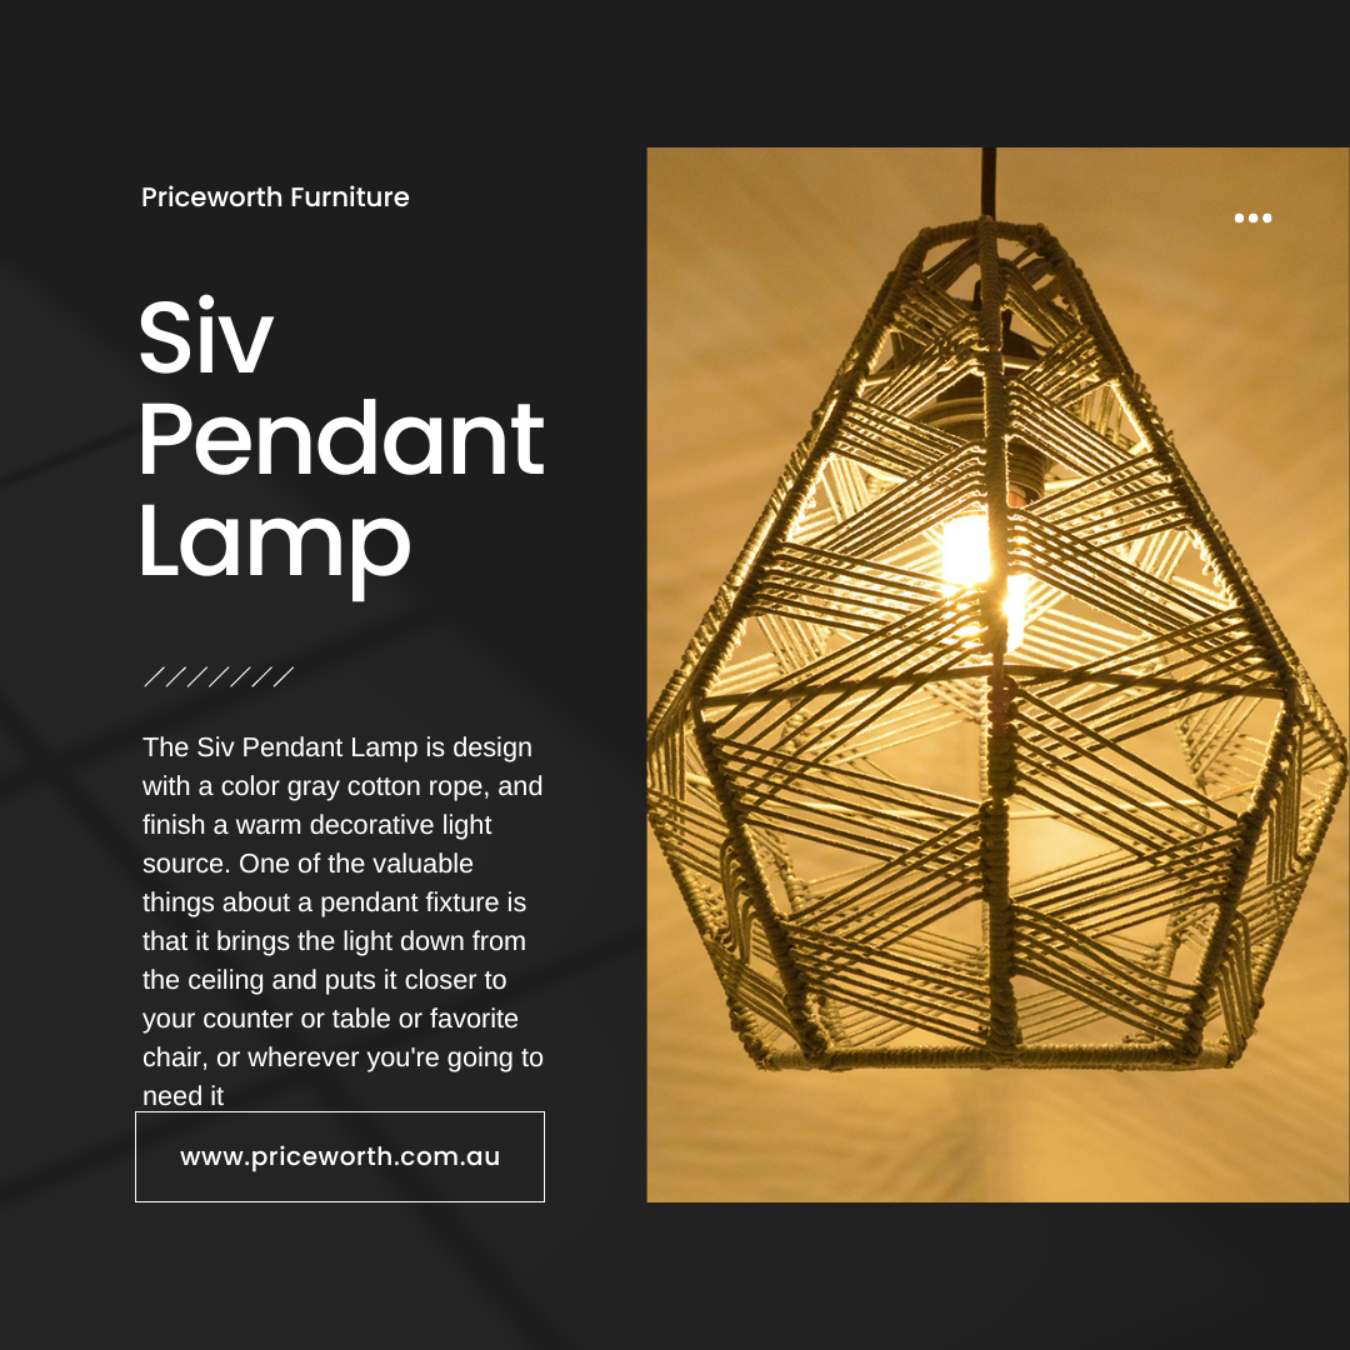 The Siv Pendant Lamp is design with a color gray cotton rope, and finish a warm decorative light source.